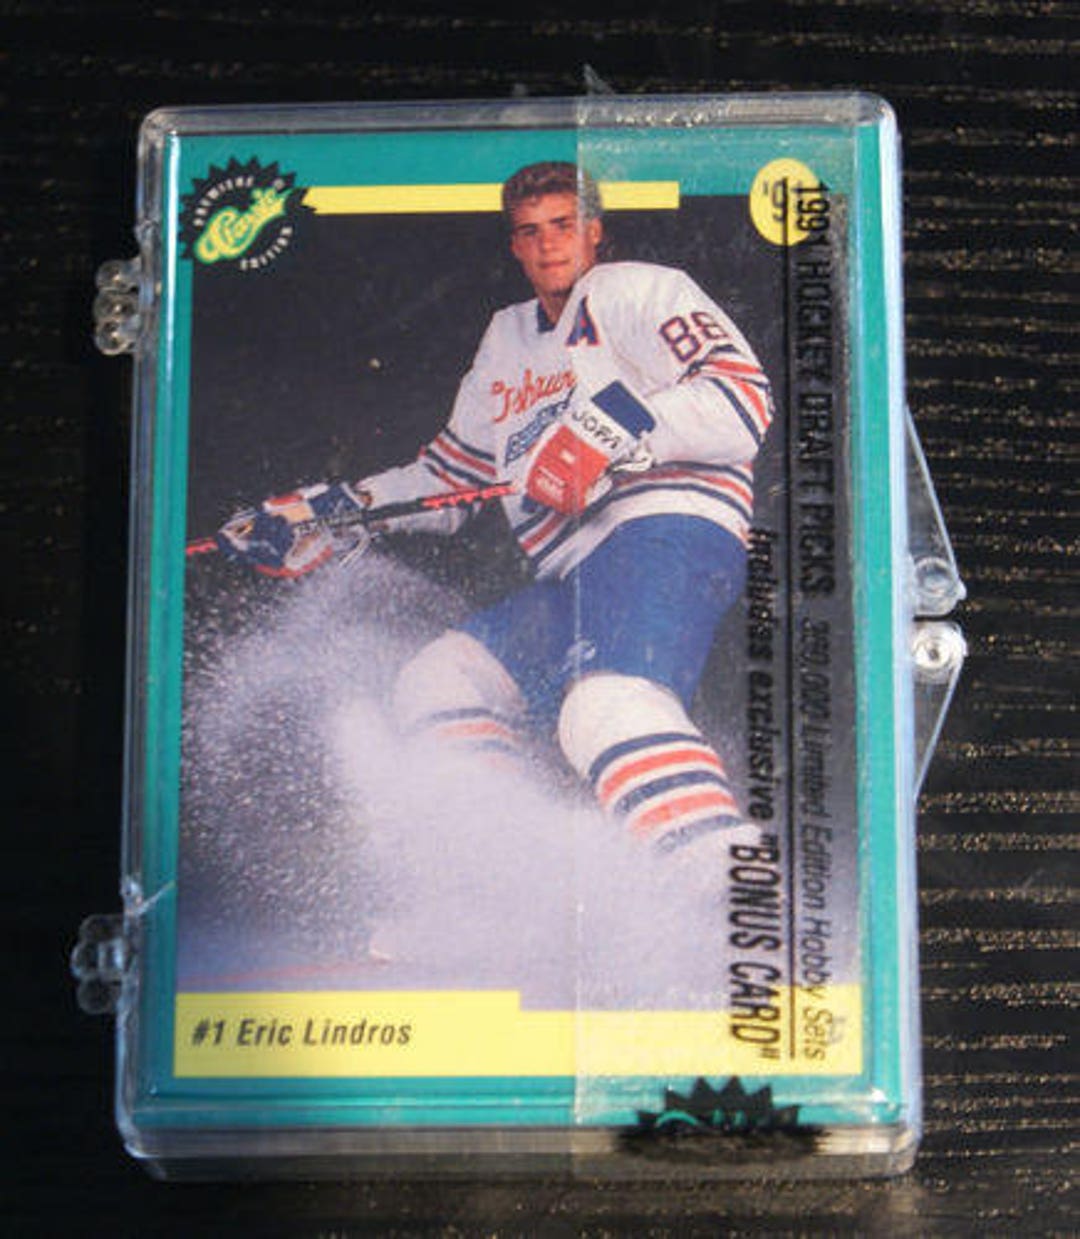 Eric Lindros (True) Rookie Cards - True Rookie Cards